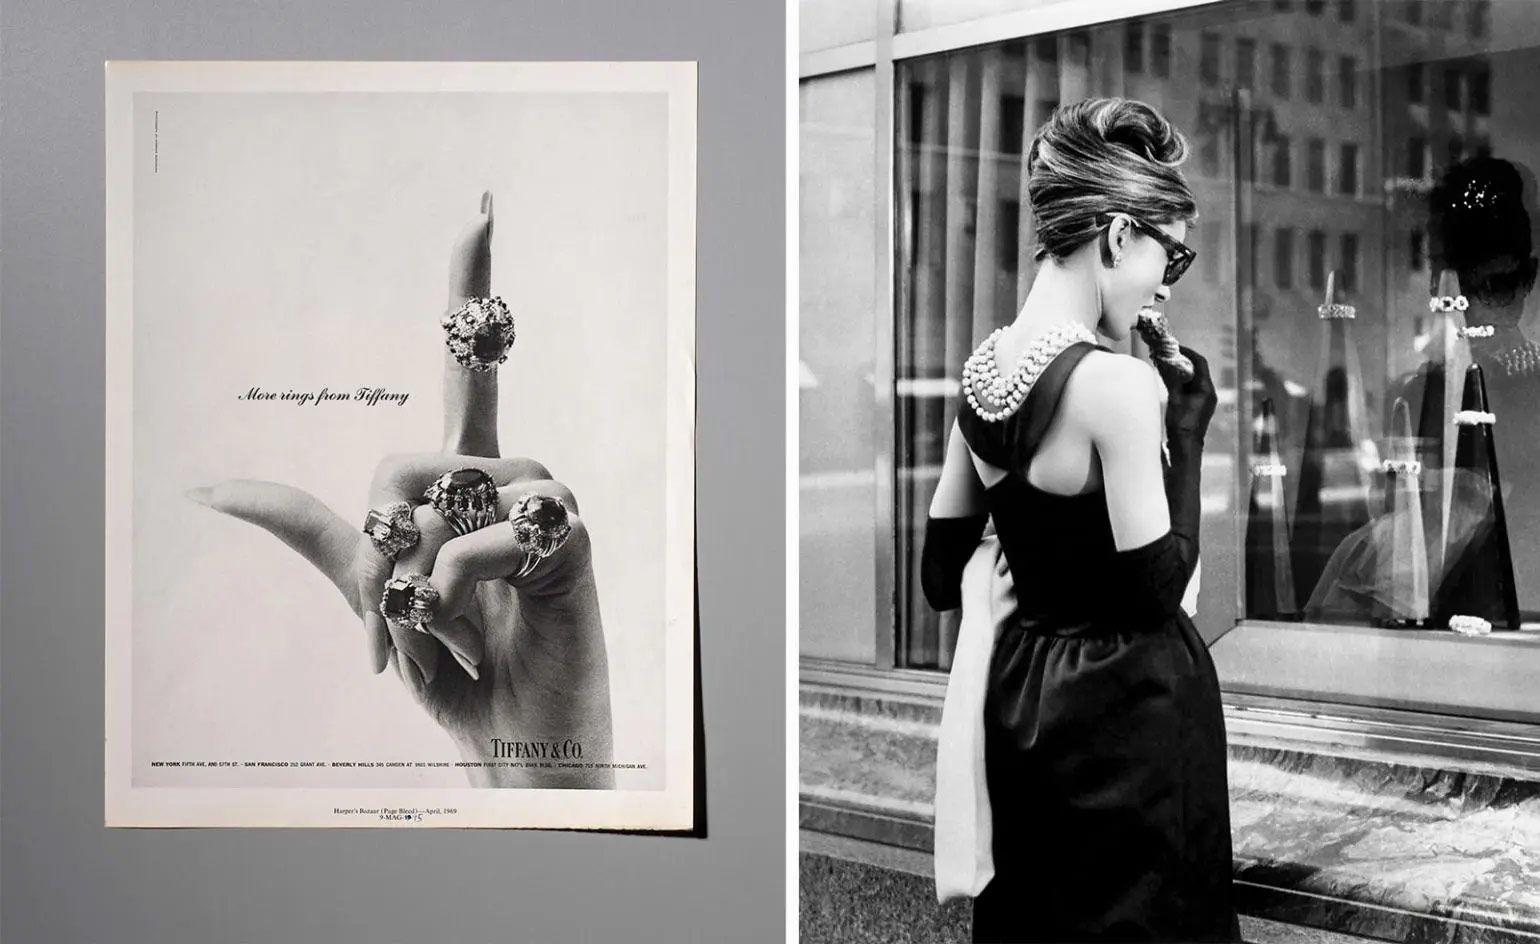 Discover the illustrious history of Tiffany & Co. at the ‘Vision & Virtuosity’ exhibition at London’s Saatchi Gallery y